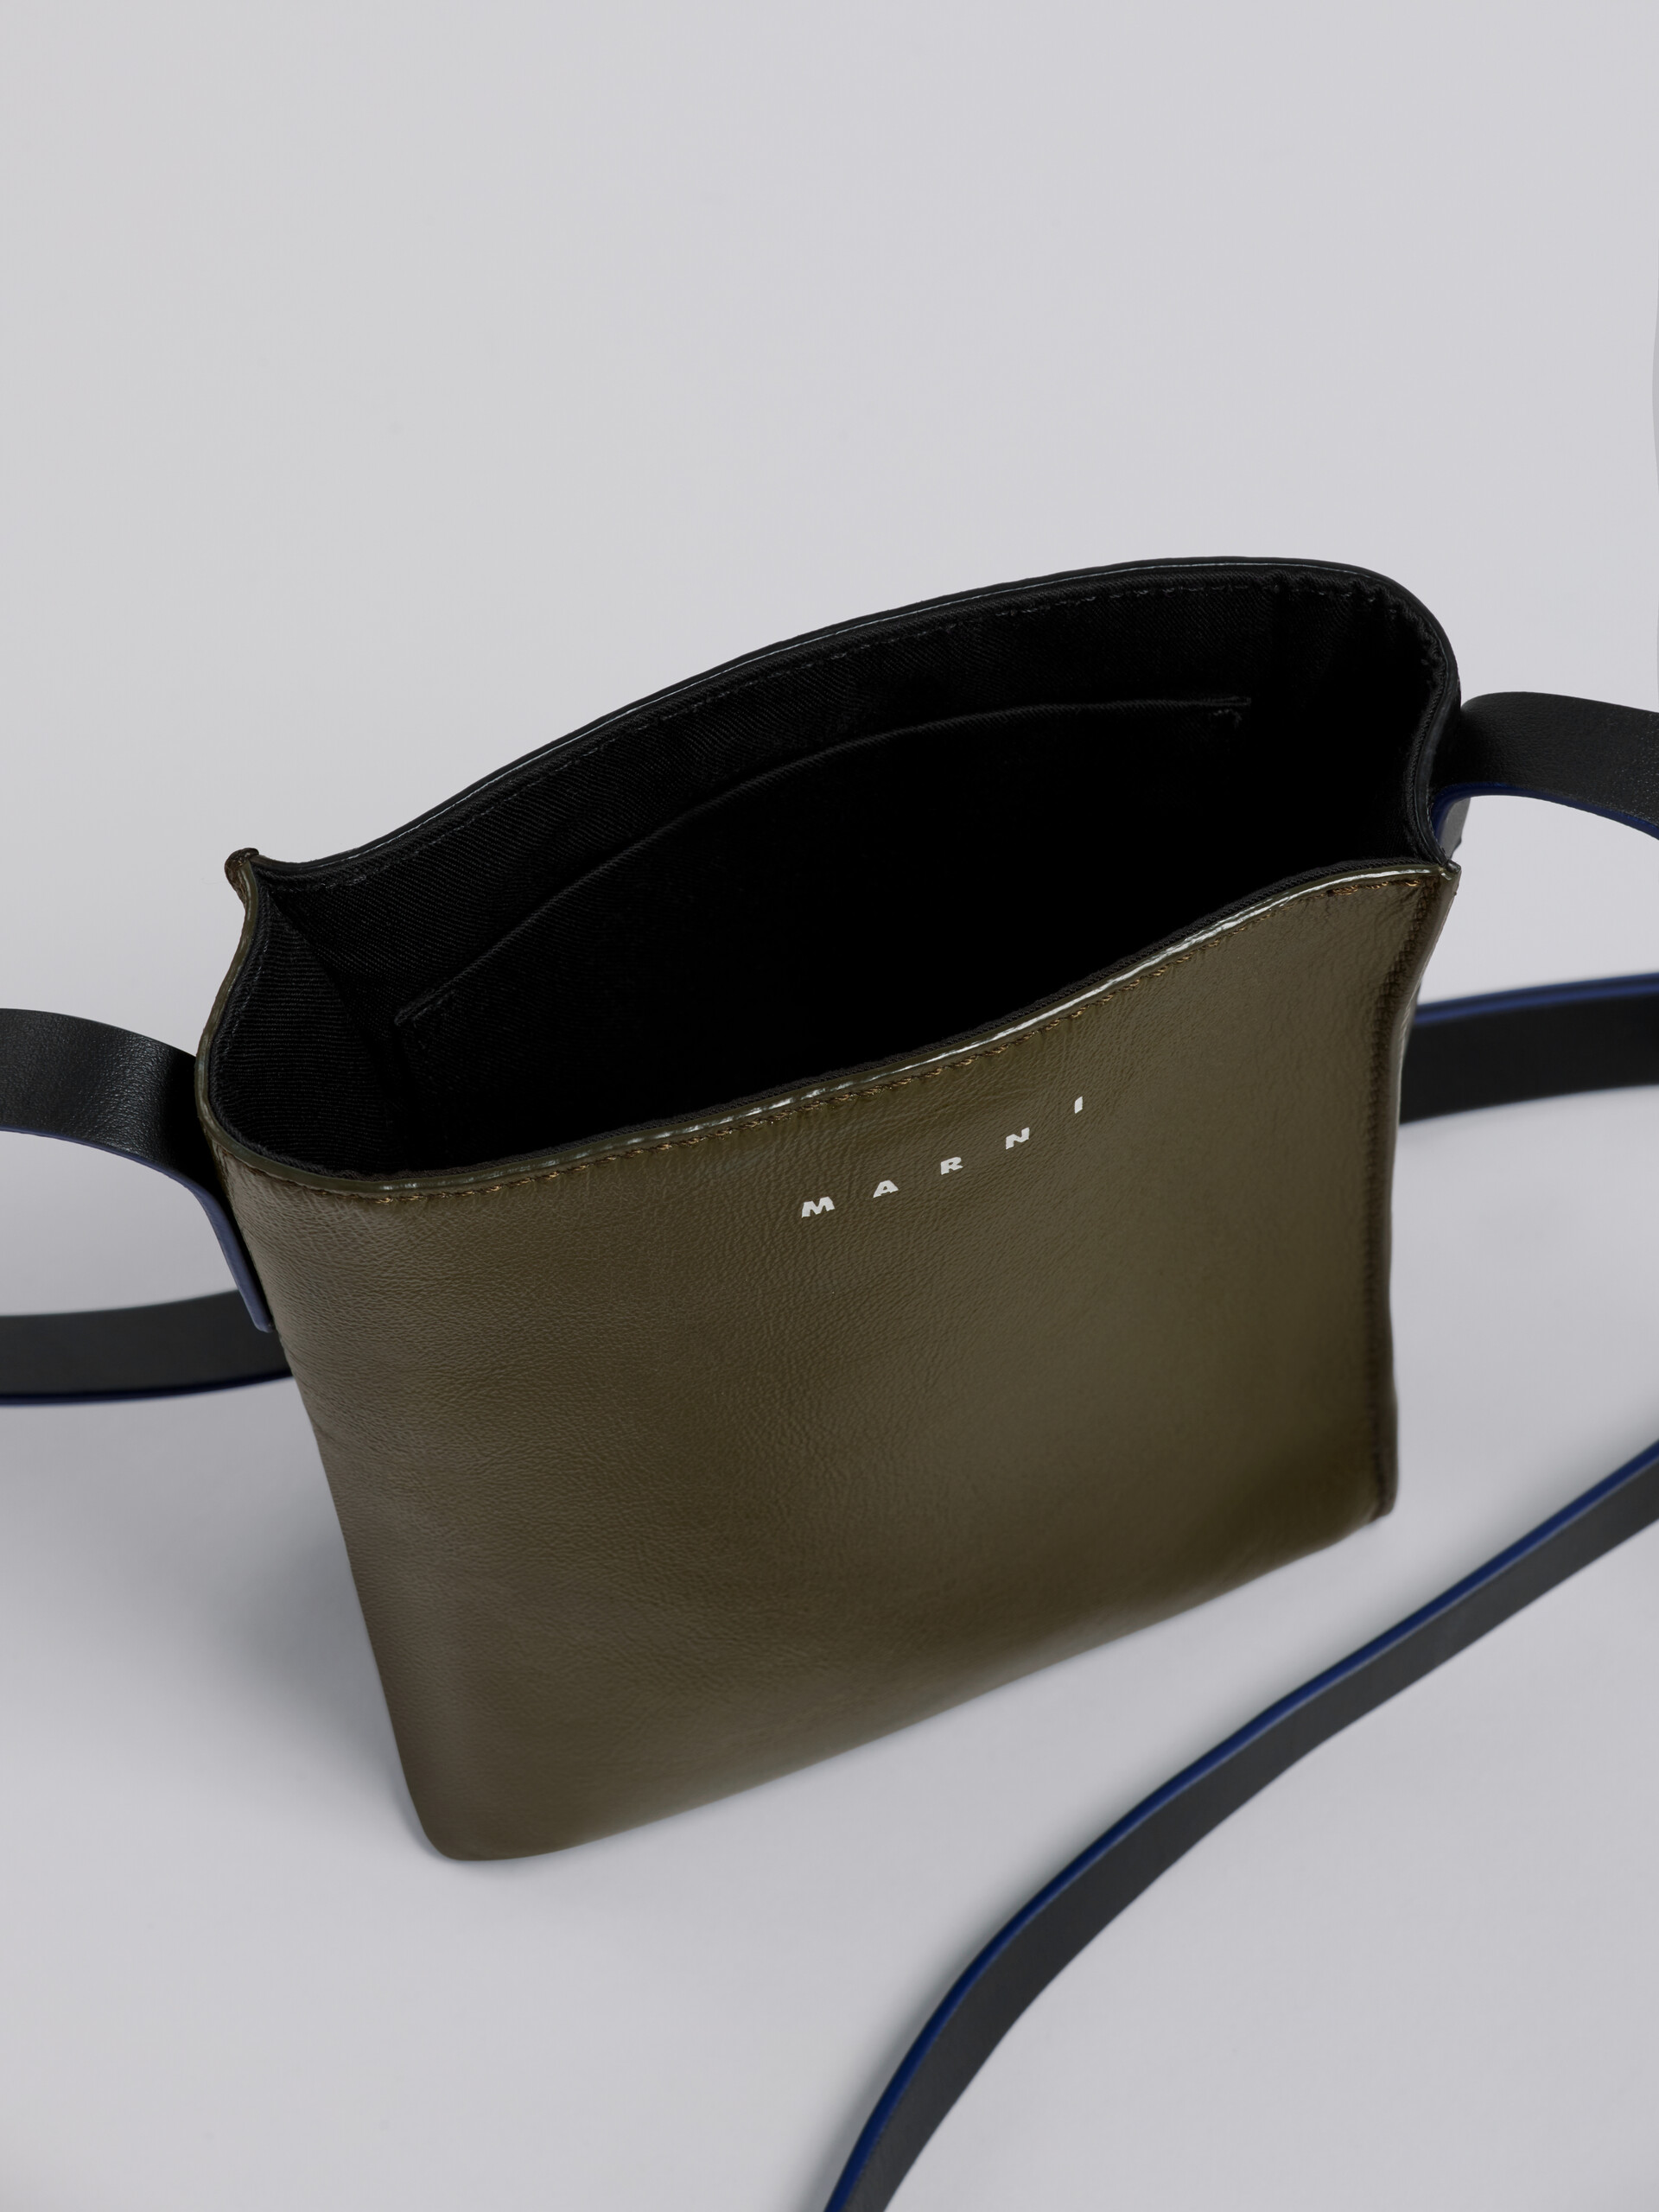 MUSEO SOFT  bag in shiny two-tone calfskin leather - Shoulder Bags - Image 3